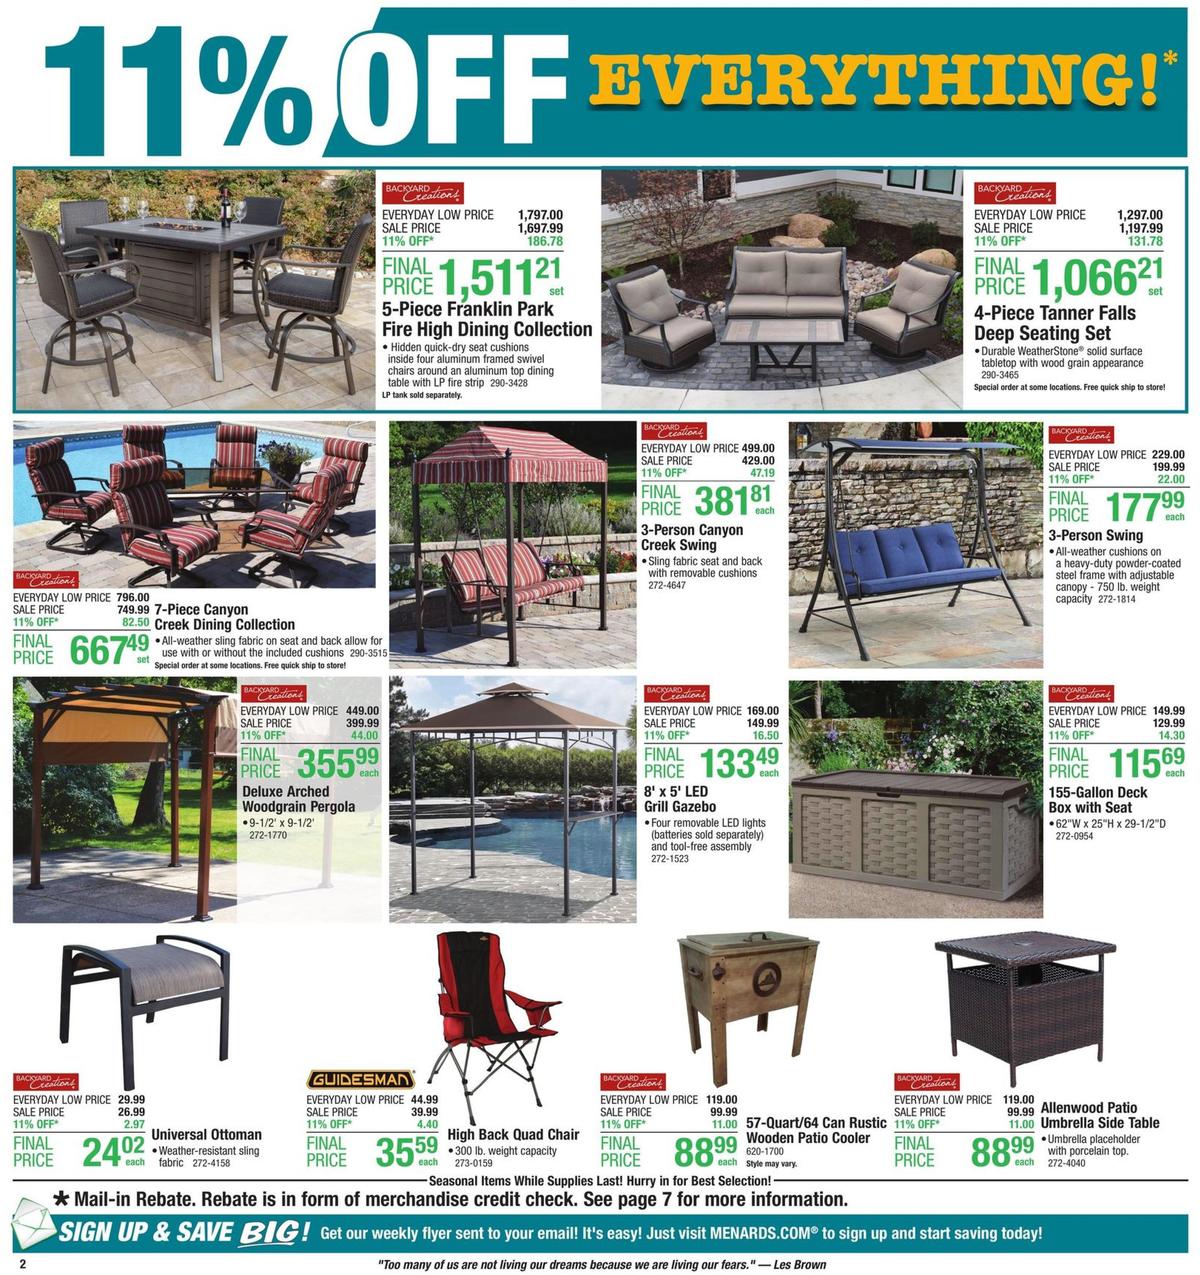 Menards Weekly Ads & Special Buys for June 16 - Page 2